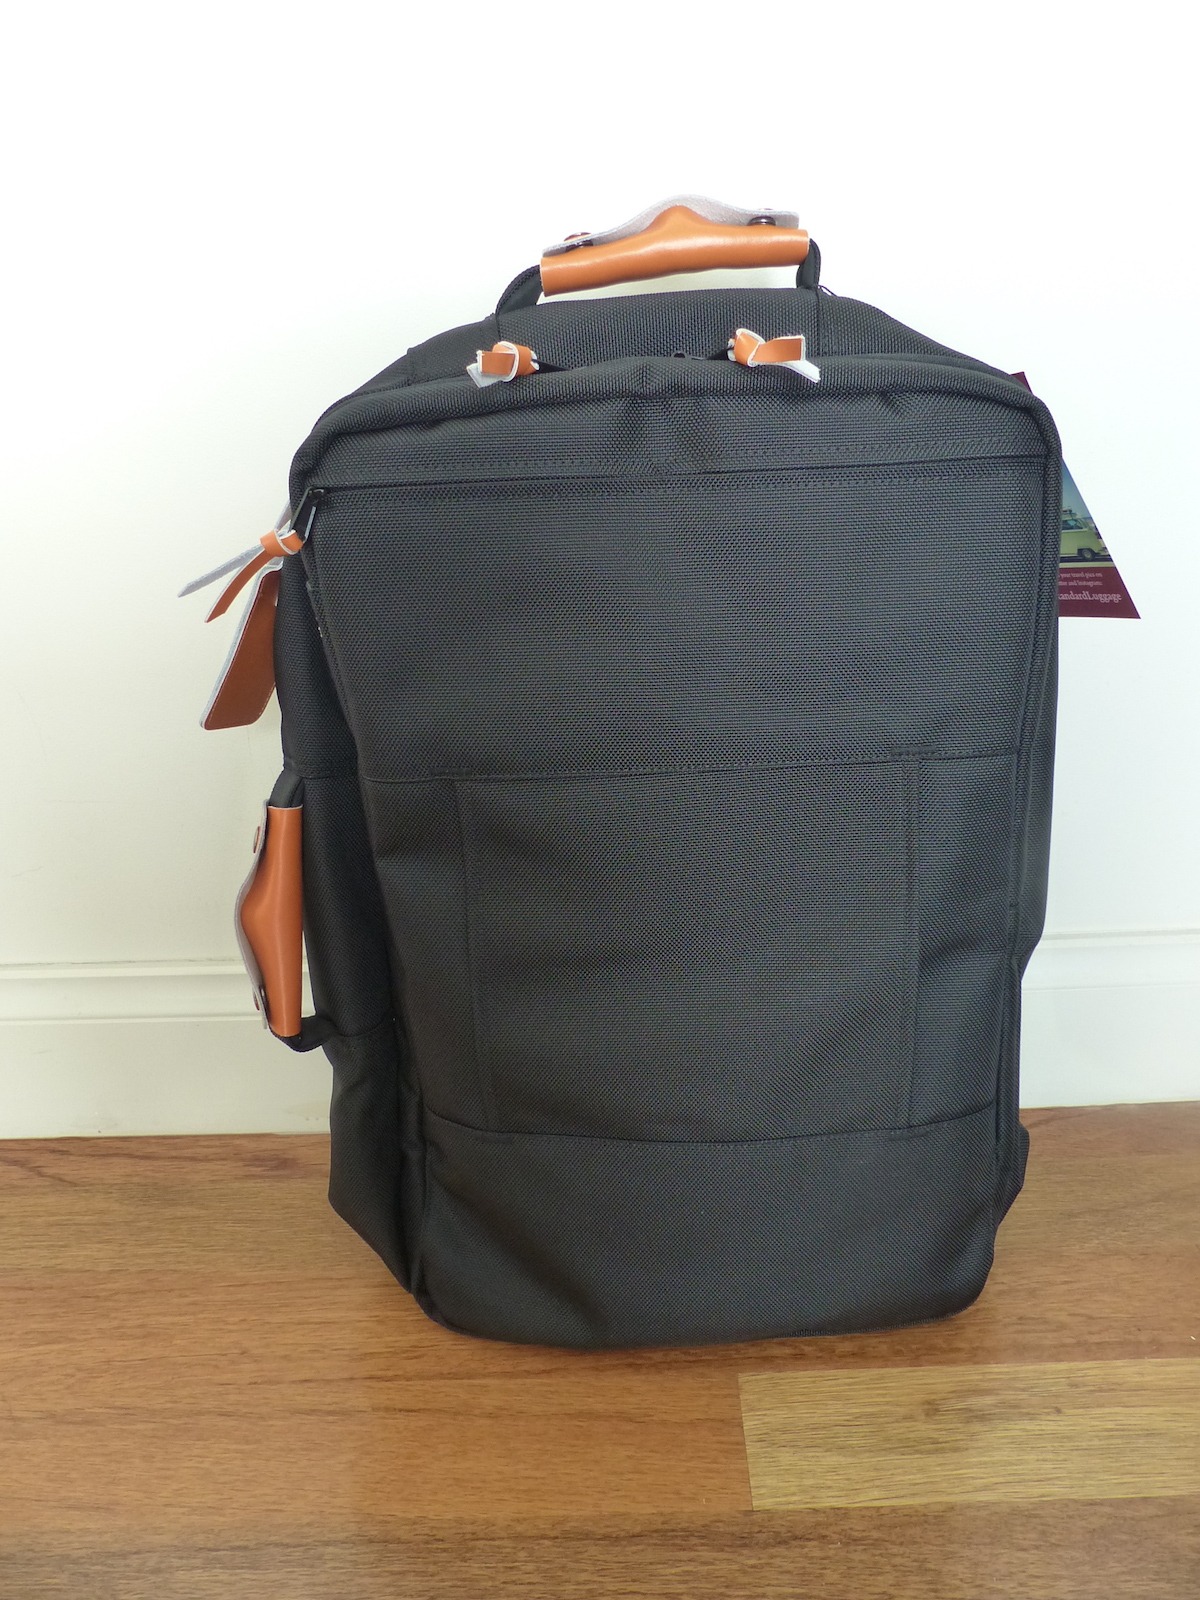 Review of the Awesome Standard Luggage Carry On Backpack - Family Travel Blog - Travel with Kids